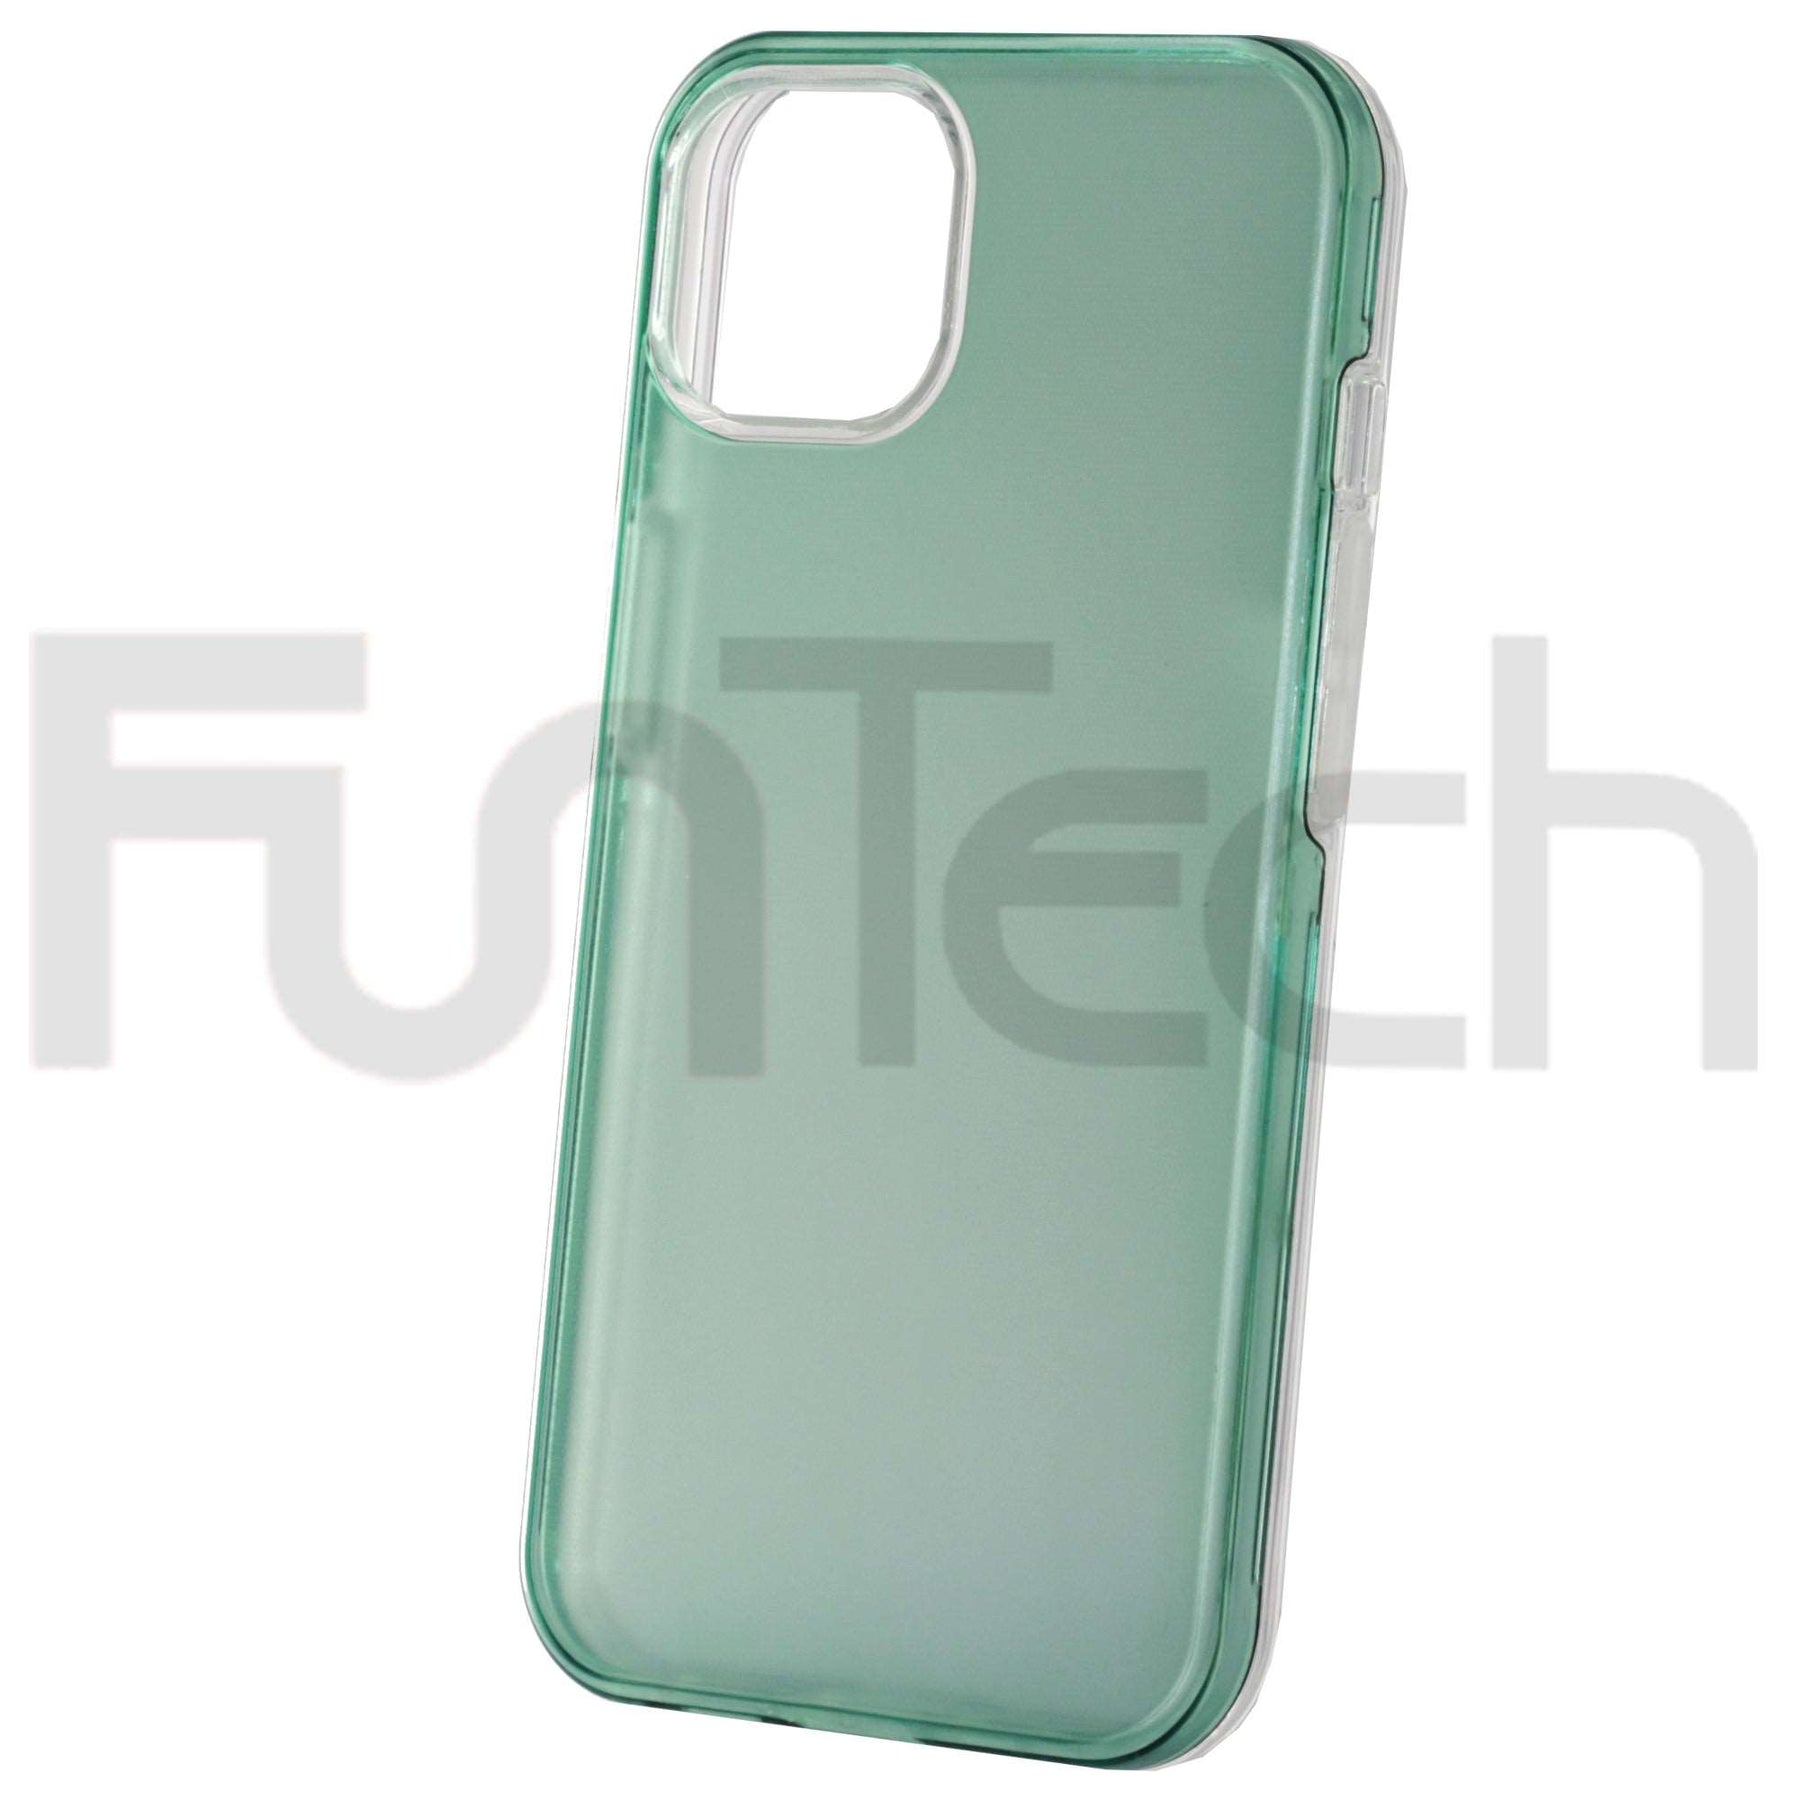 Apple iPhone 13 Mini, Double Sided Frosted Surface, Phone Case, Color Green.